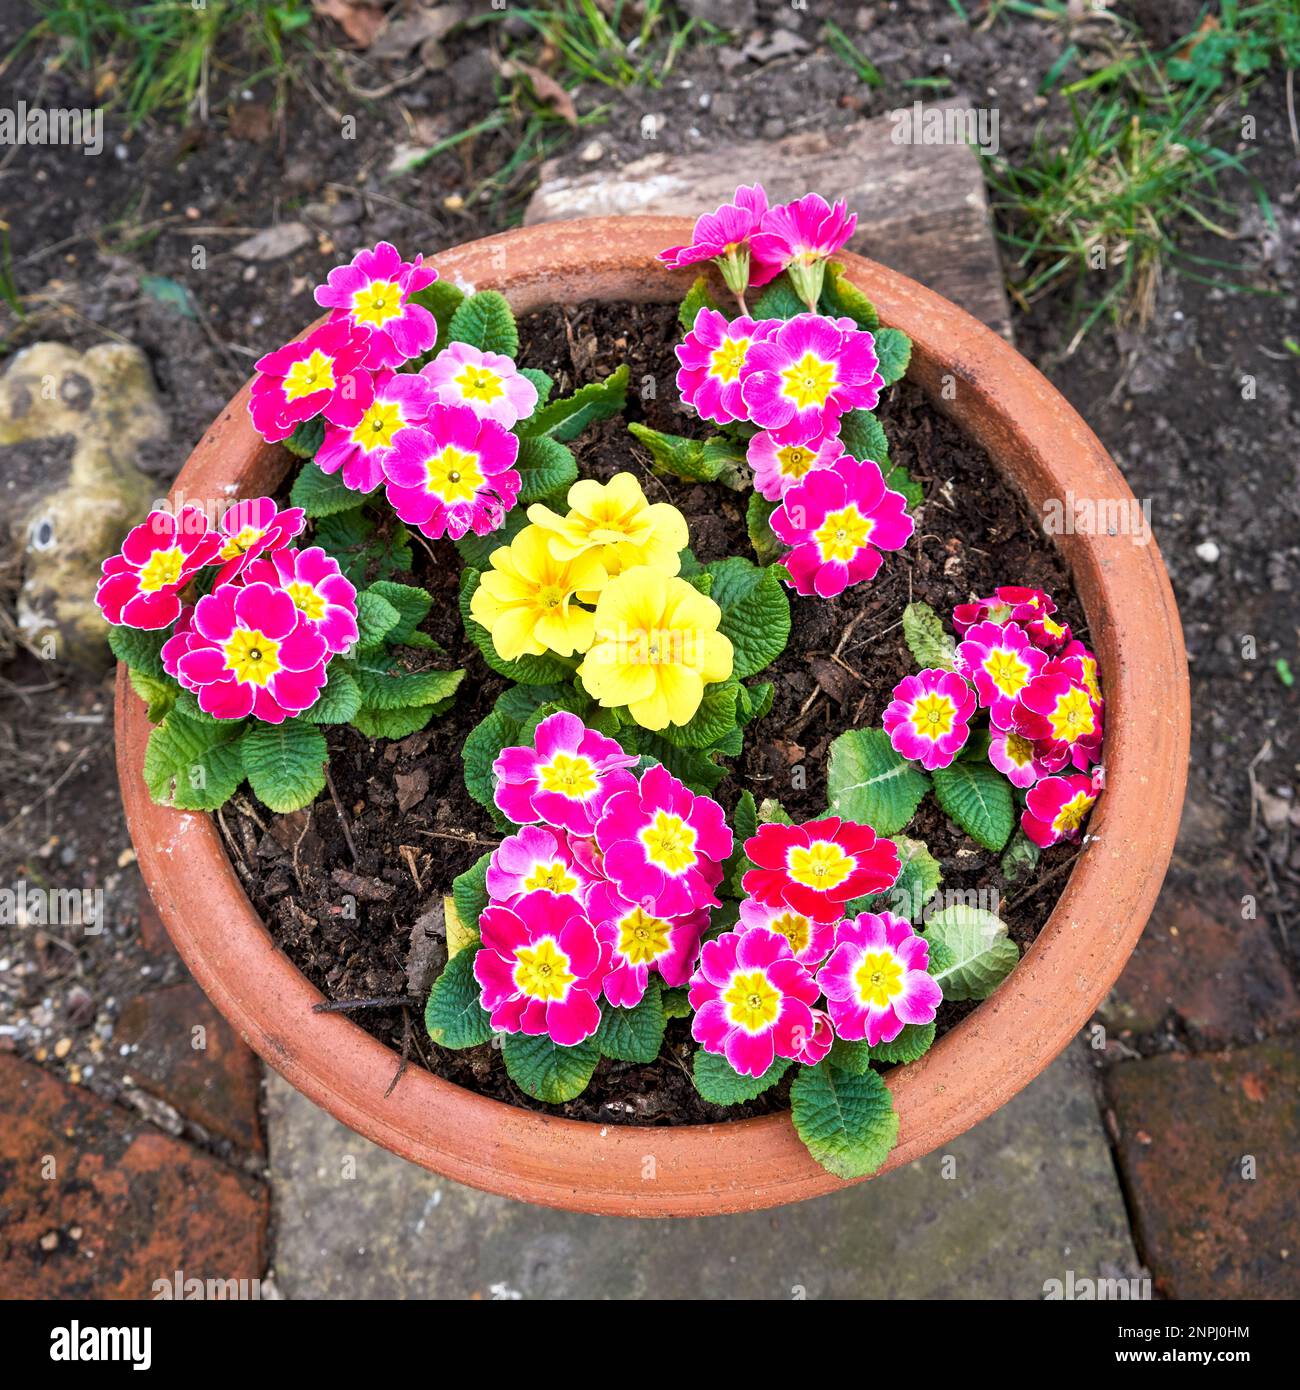 Primula plants with flowers in a terracotta pot Stock Photo